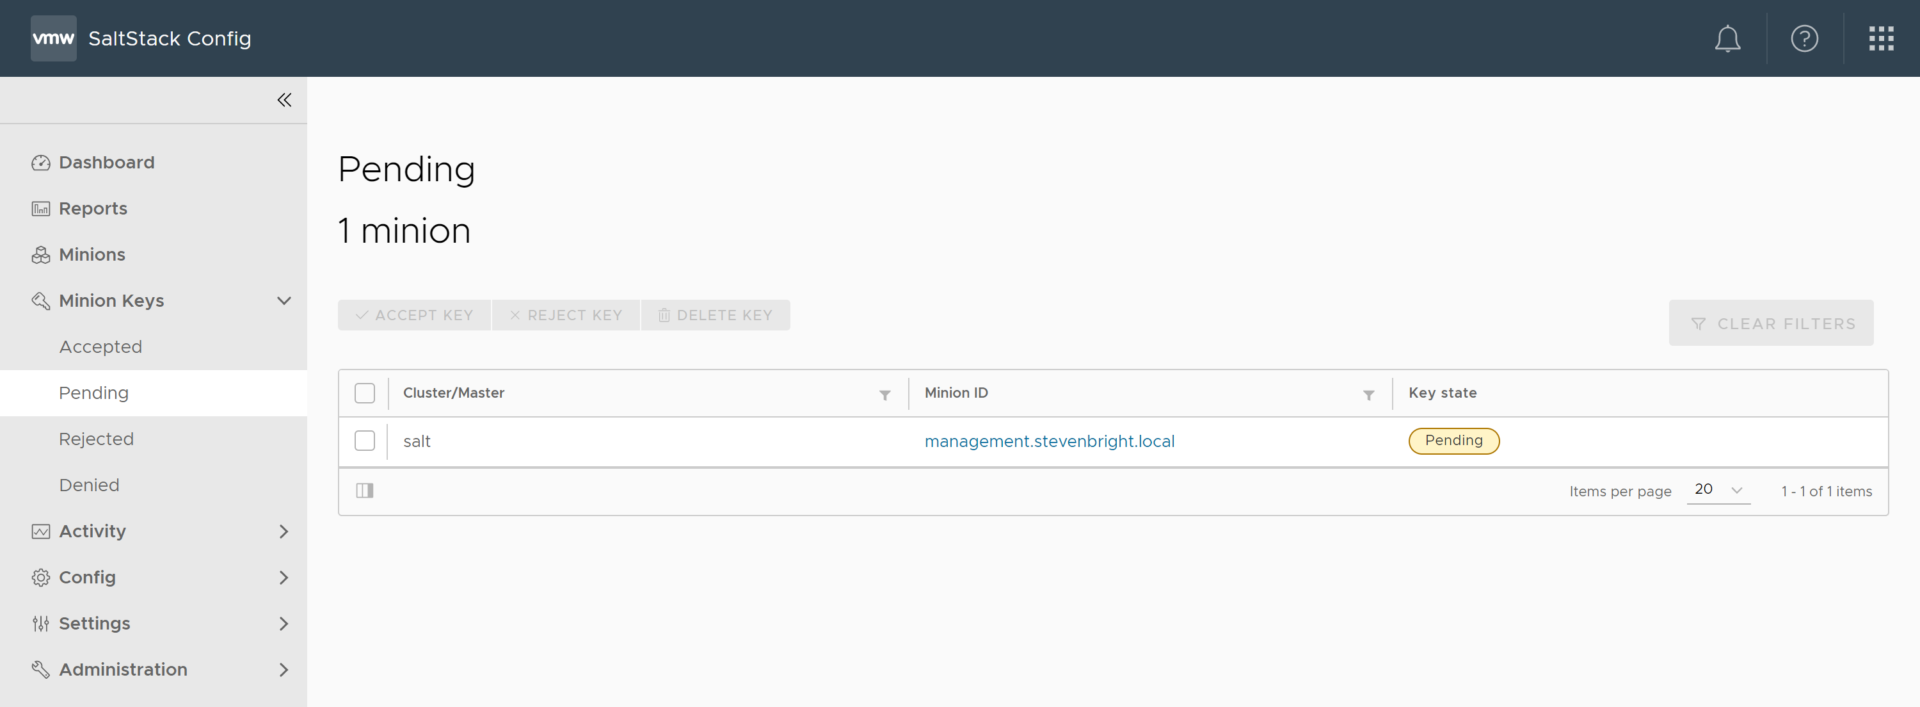 Screenshot of Pending Minion Keys in the VMware vRealize Automation SaltStack Config Web UI